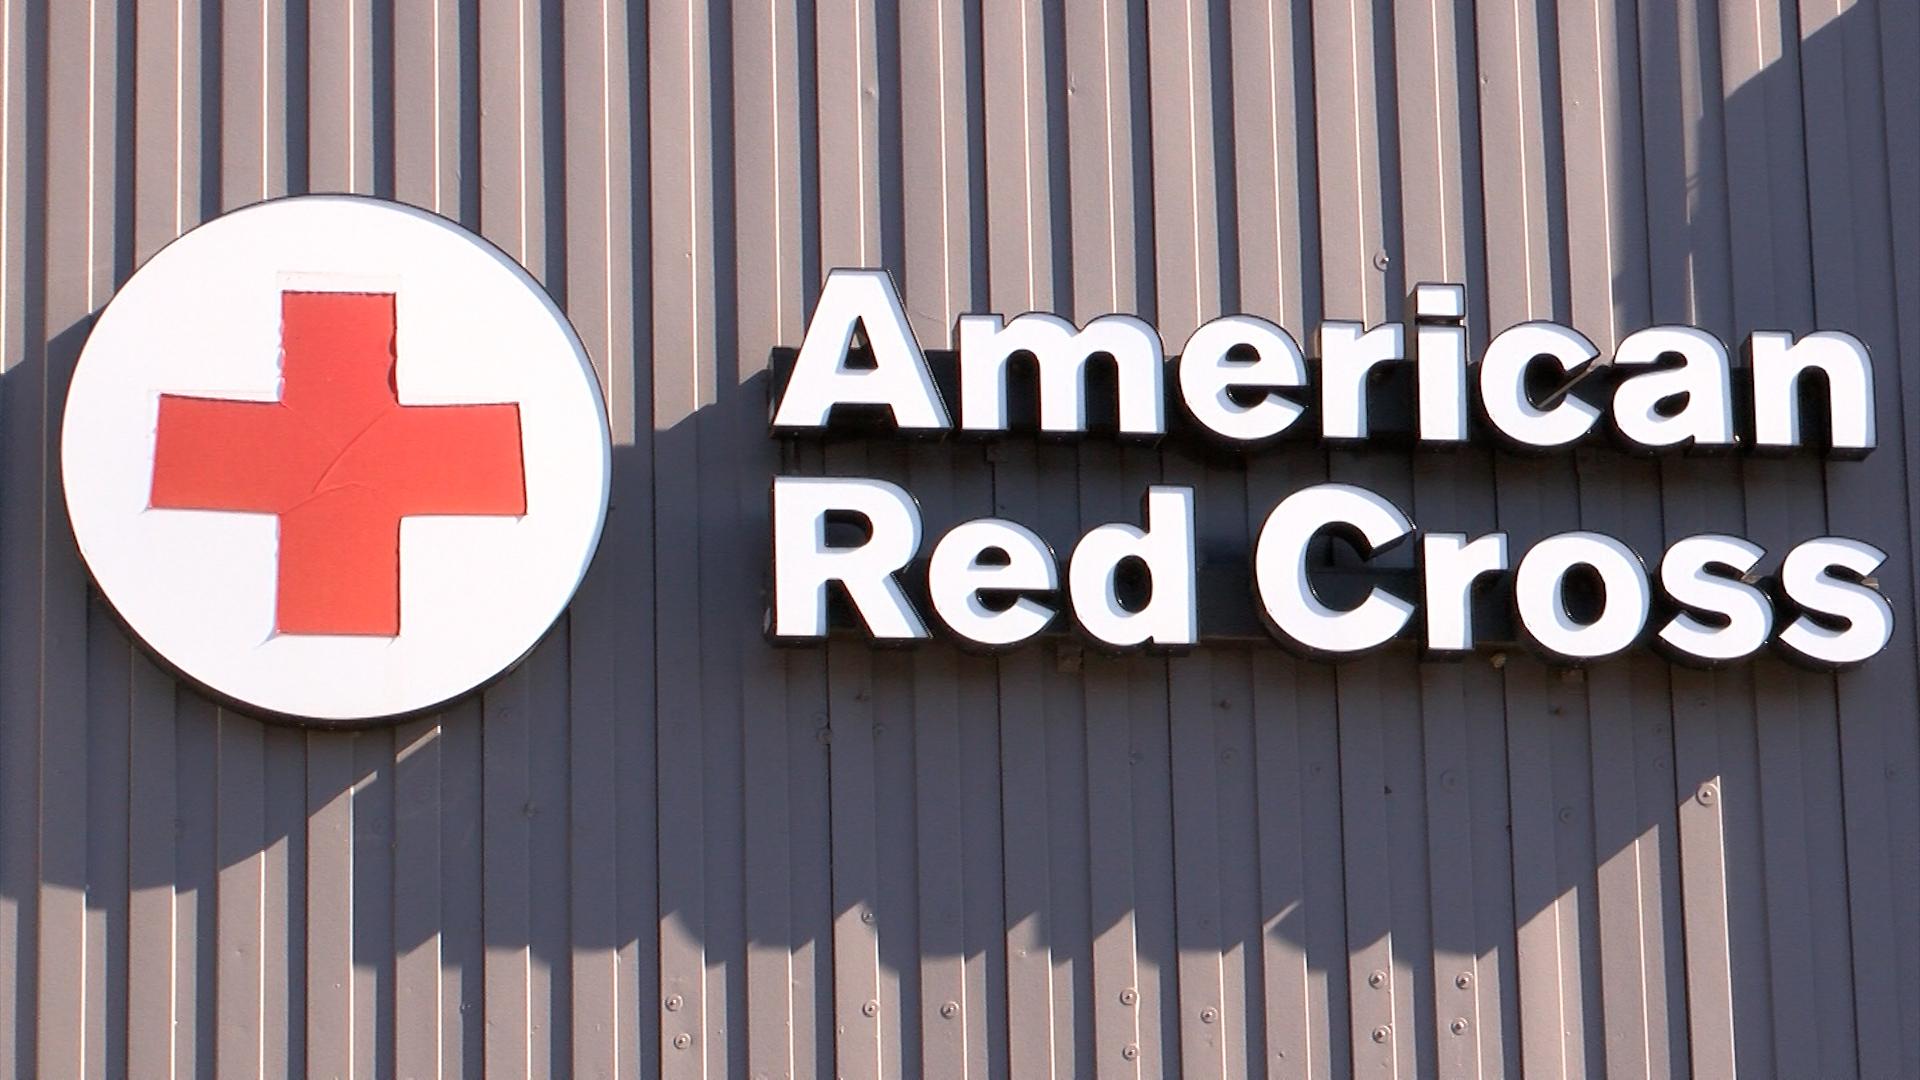 American Red Cross Wallpapers - Top Free American Red Cross Backgrounds ...